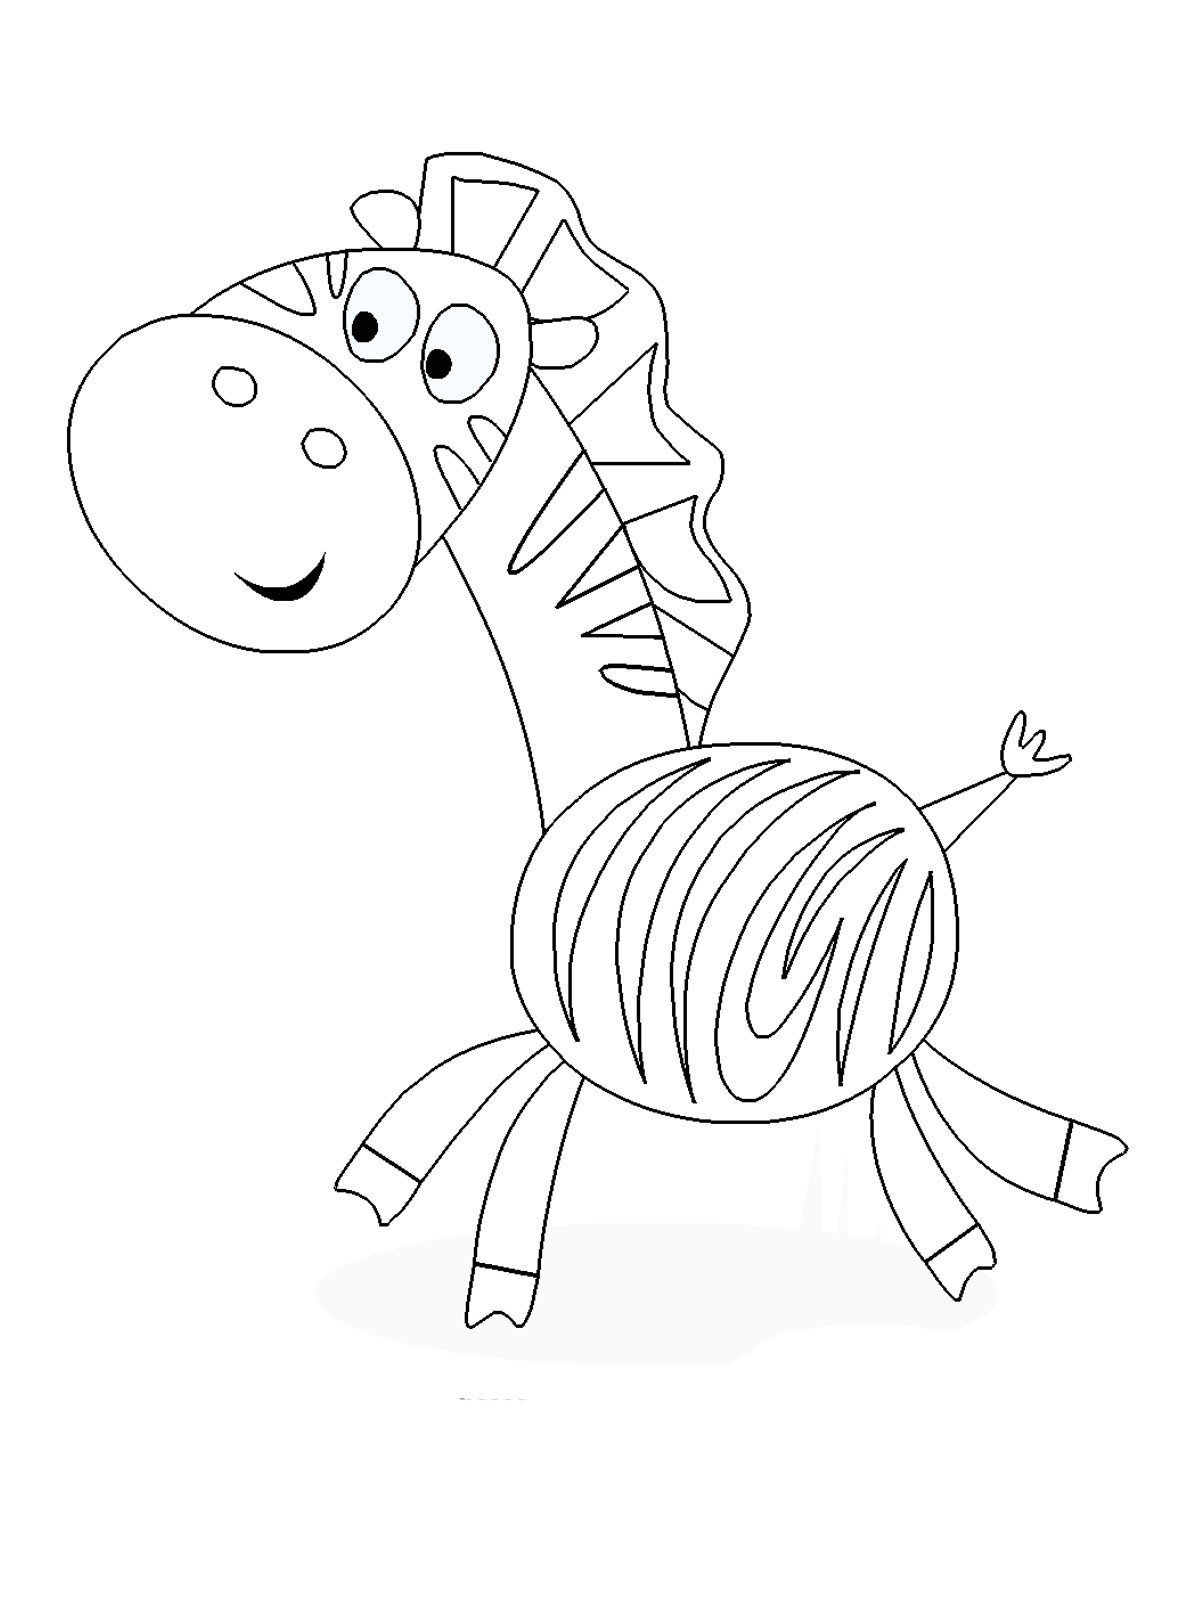 Kids Online Coloring Page
 Printable coloring pages for kids